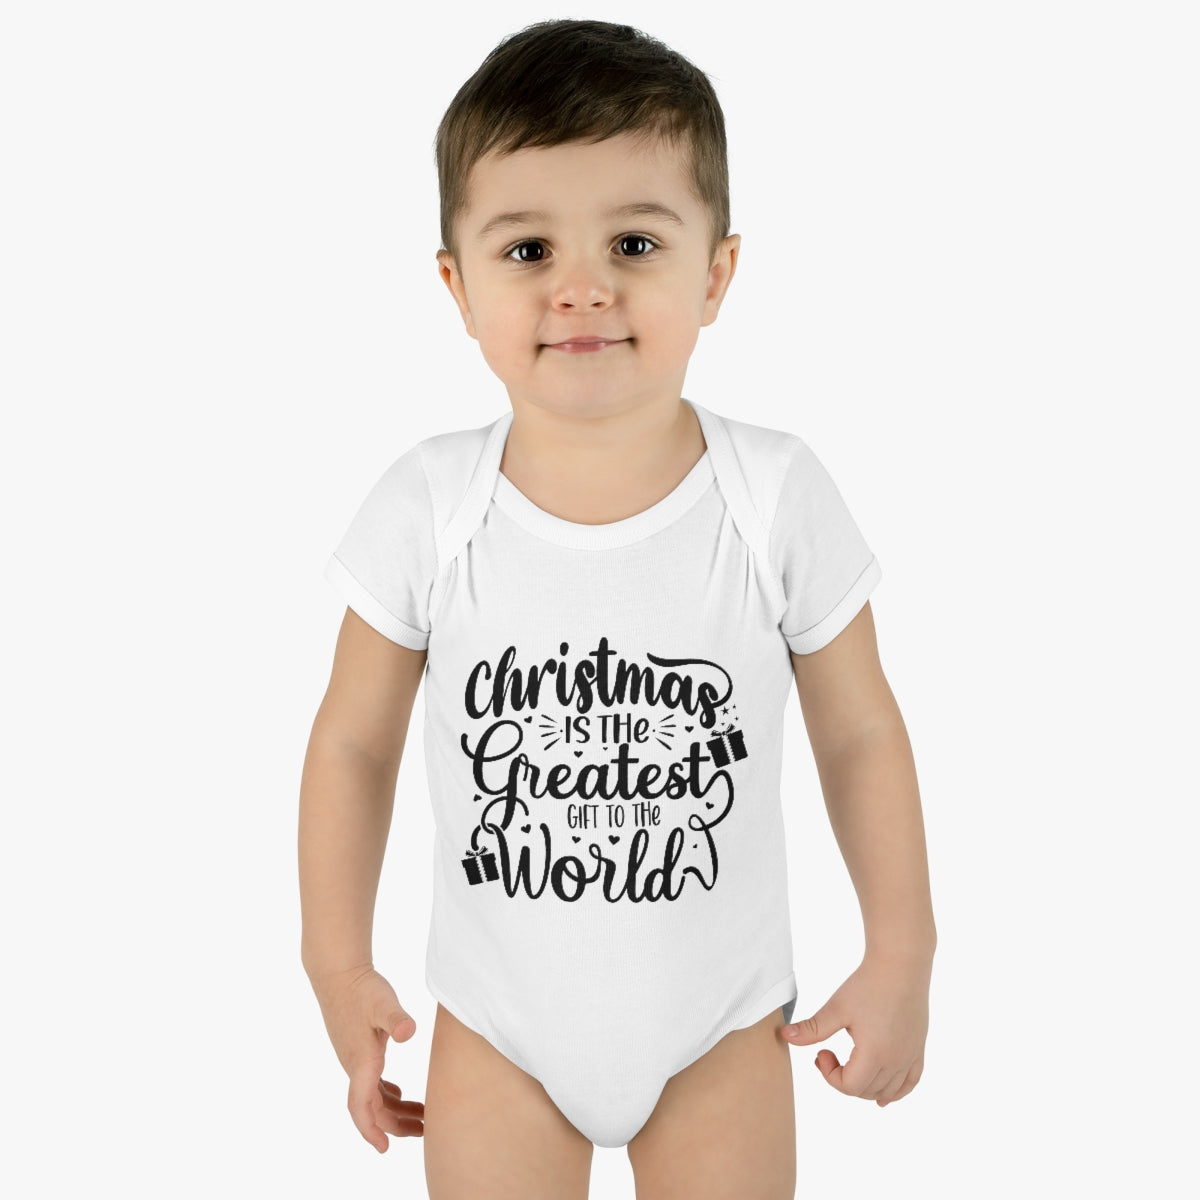 The greatest gift to the world Baby Bodysuit, Christmas Baby Bodysuit, Merry Christmas, Christmas Baby Bodysuit, Infant Bodysuit, Merry Christmas Baby Bodysuit